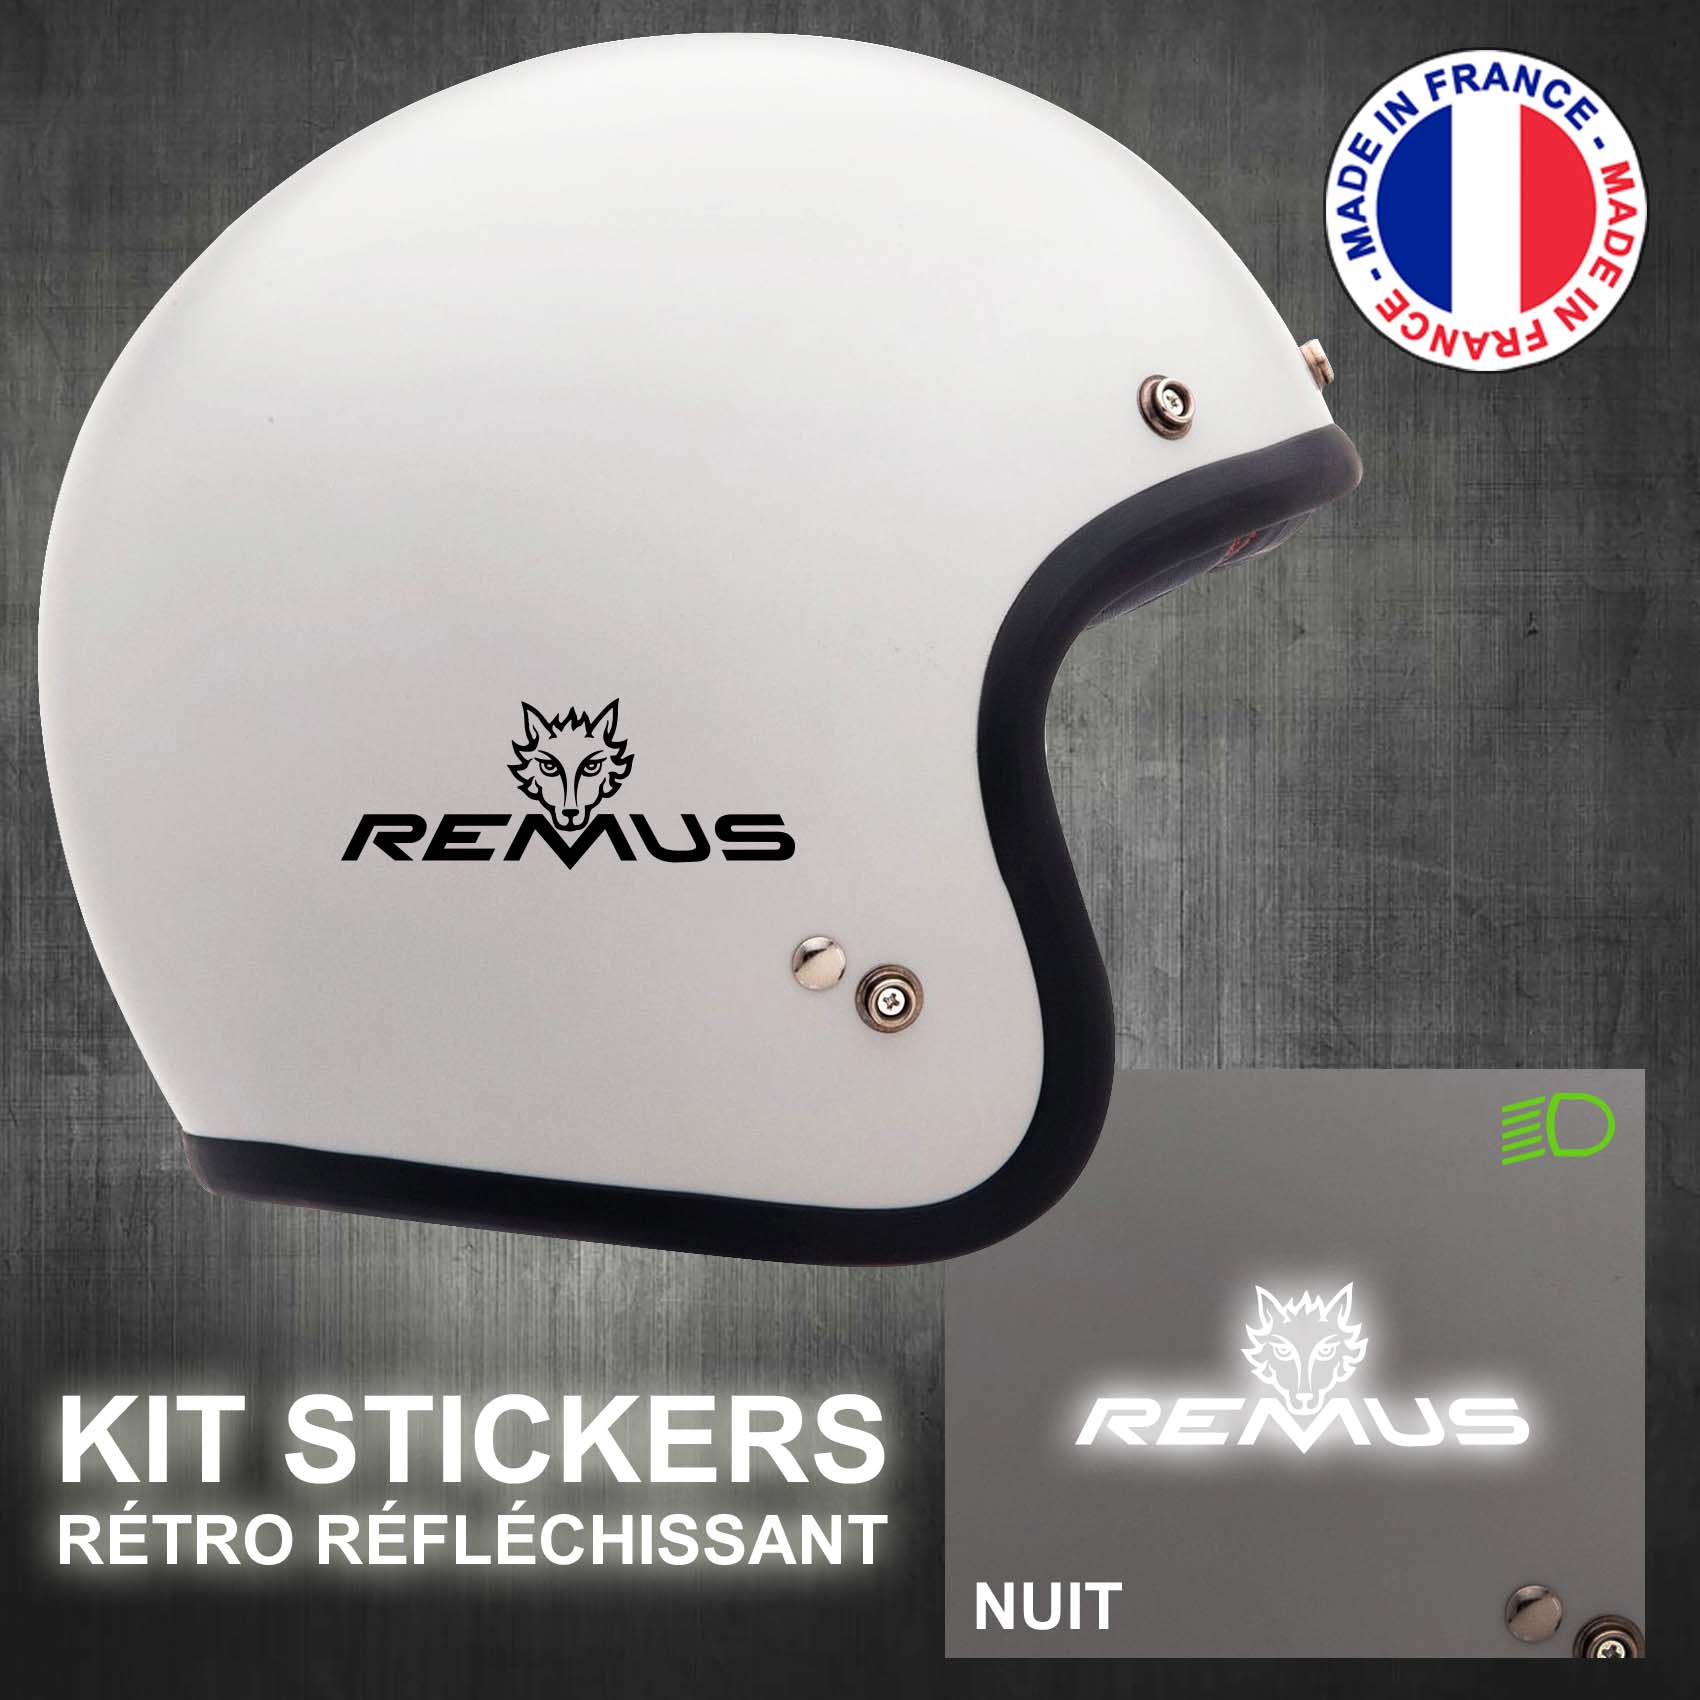 stickers-casque-moto-remus-ref1-retro-reflechissant-autocollant-moto-velo-tuning-racing-route-sticker-casques-adhesif-scooter-nuit-securite-decals-personnalise-personnalisable-min